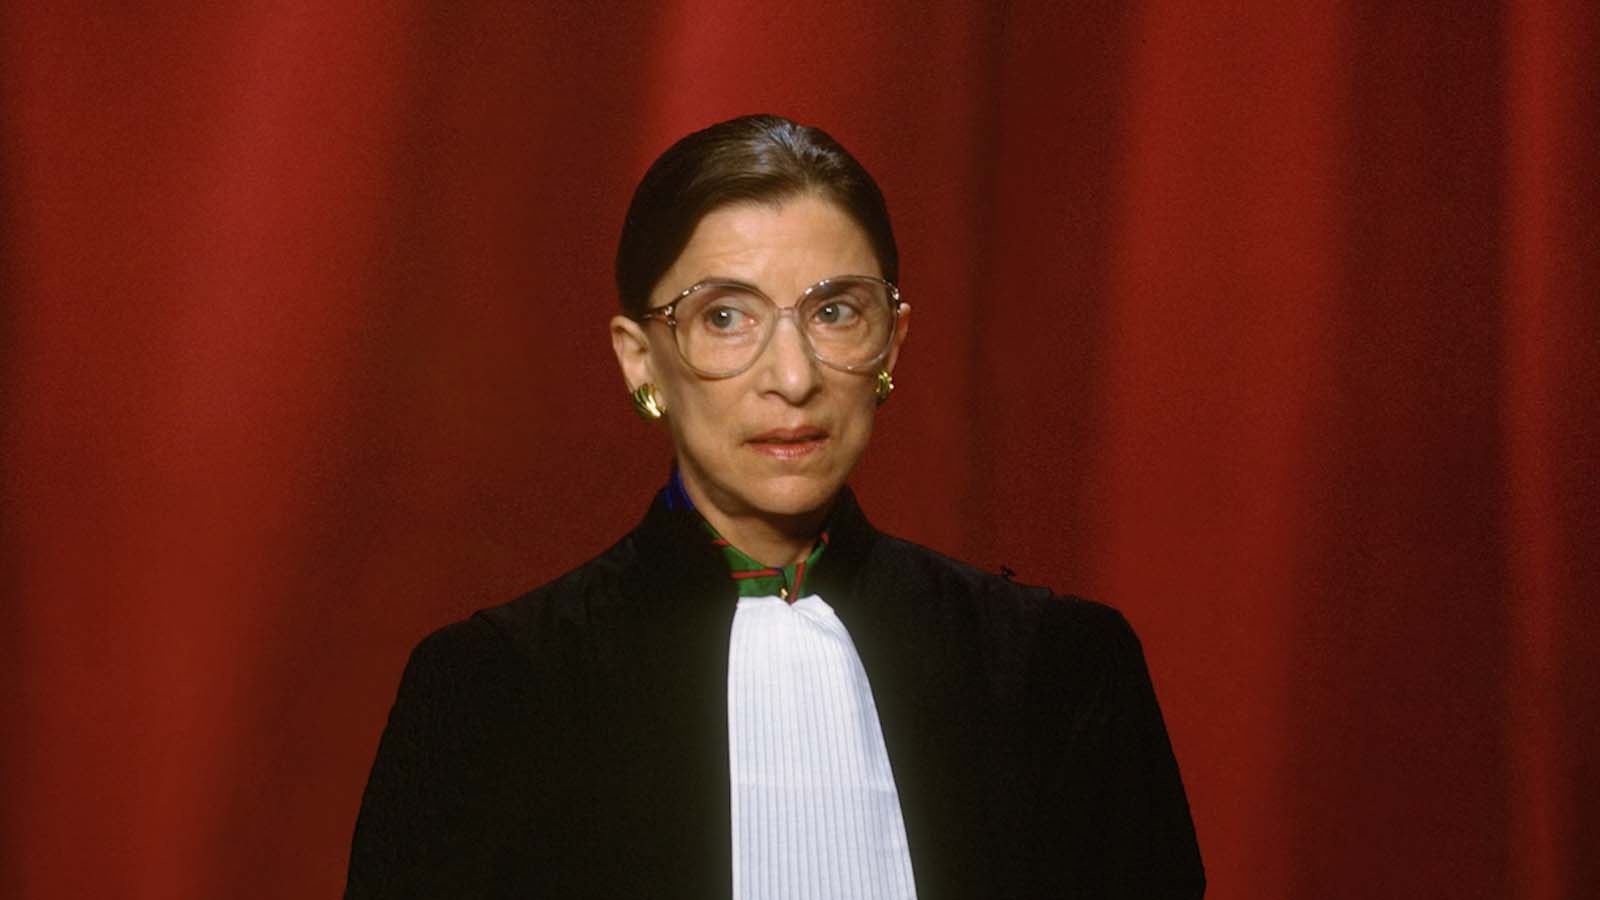 Ruth Bader Ginsberg in front of a red background.